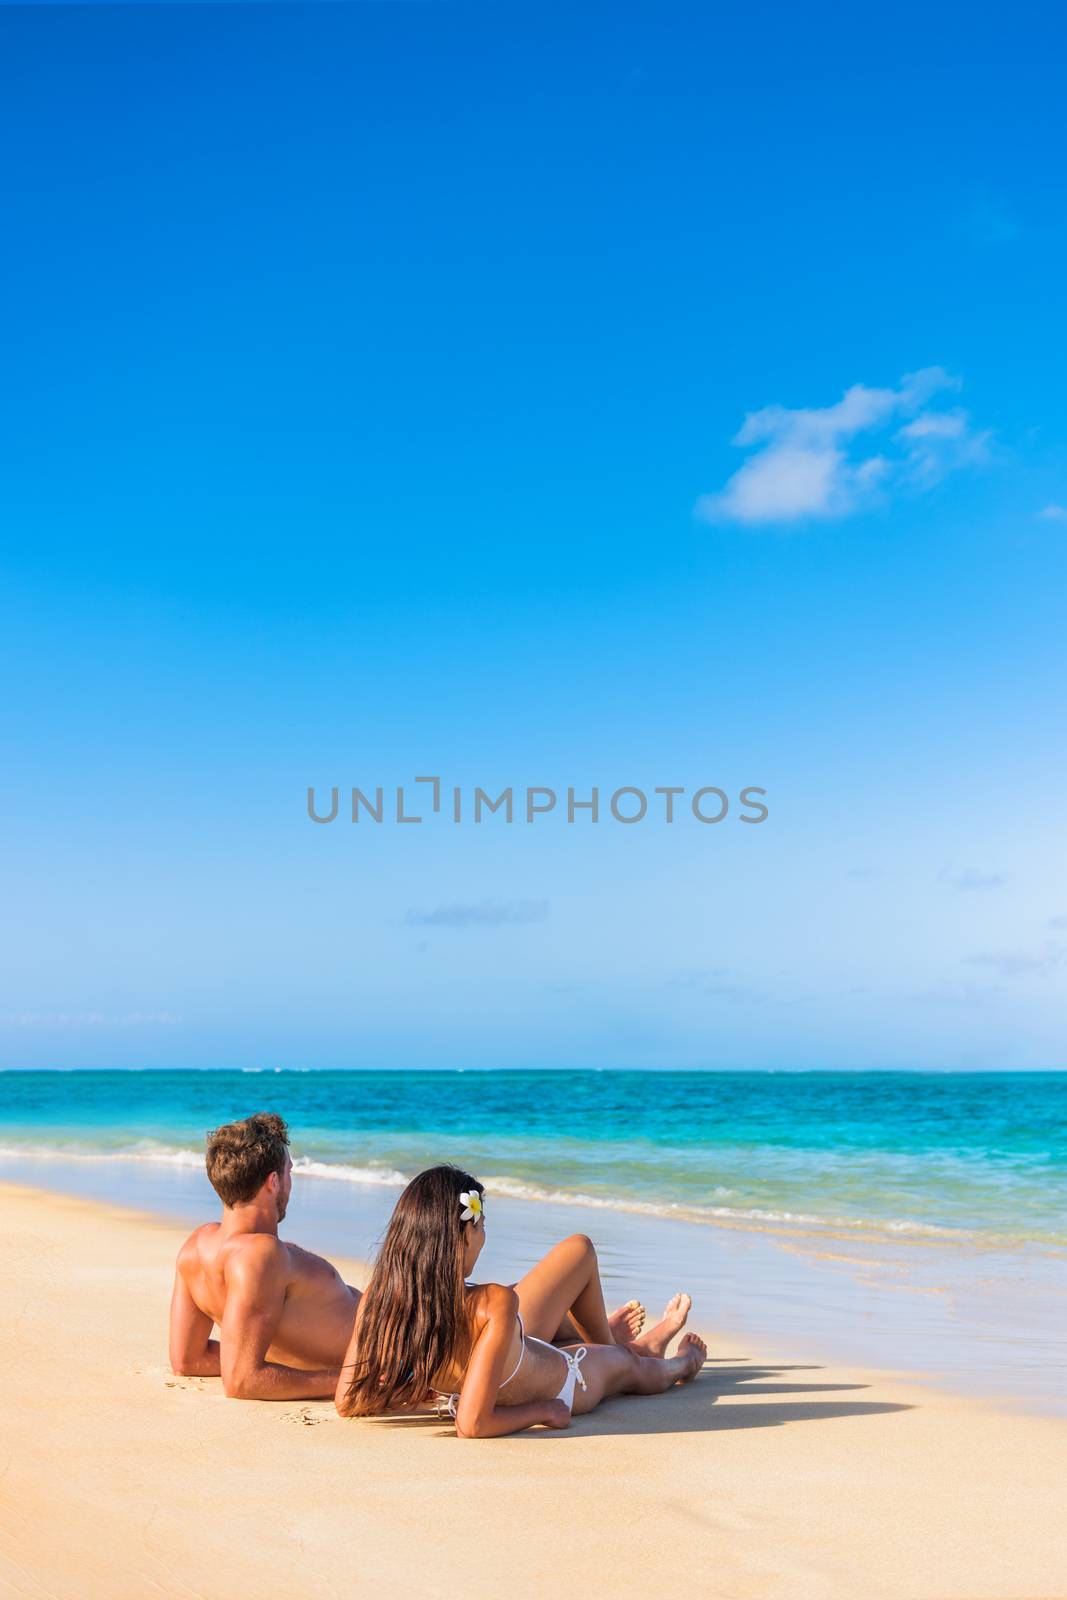 Beach vacation couple tanning under the tropical sun enjoying summer holidays traveling aroung the world. Young people lying down in paradise. Vertical background with copy space on sky.